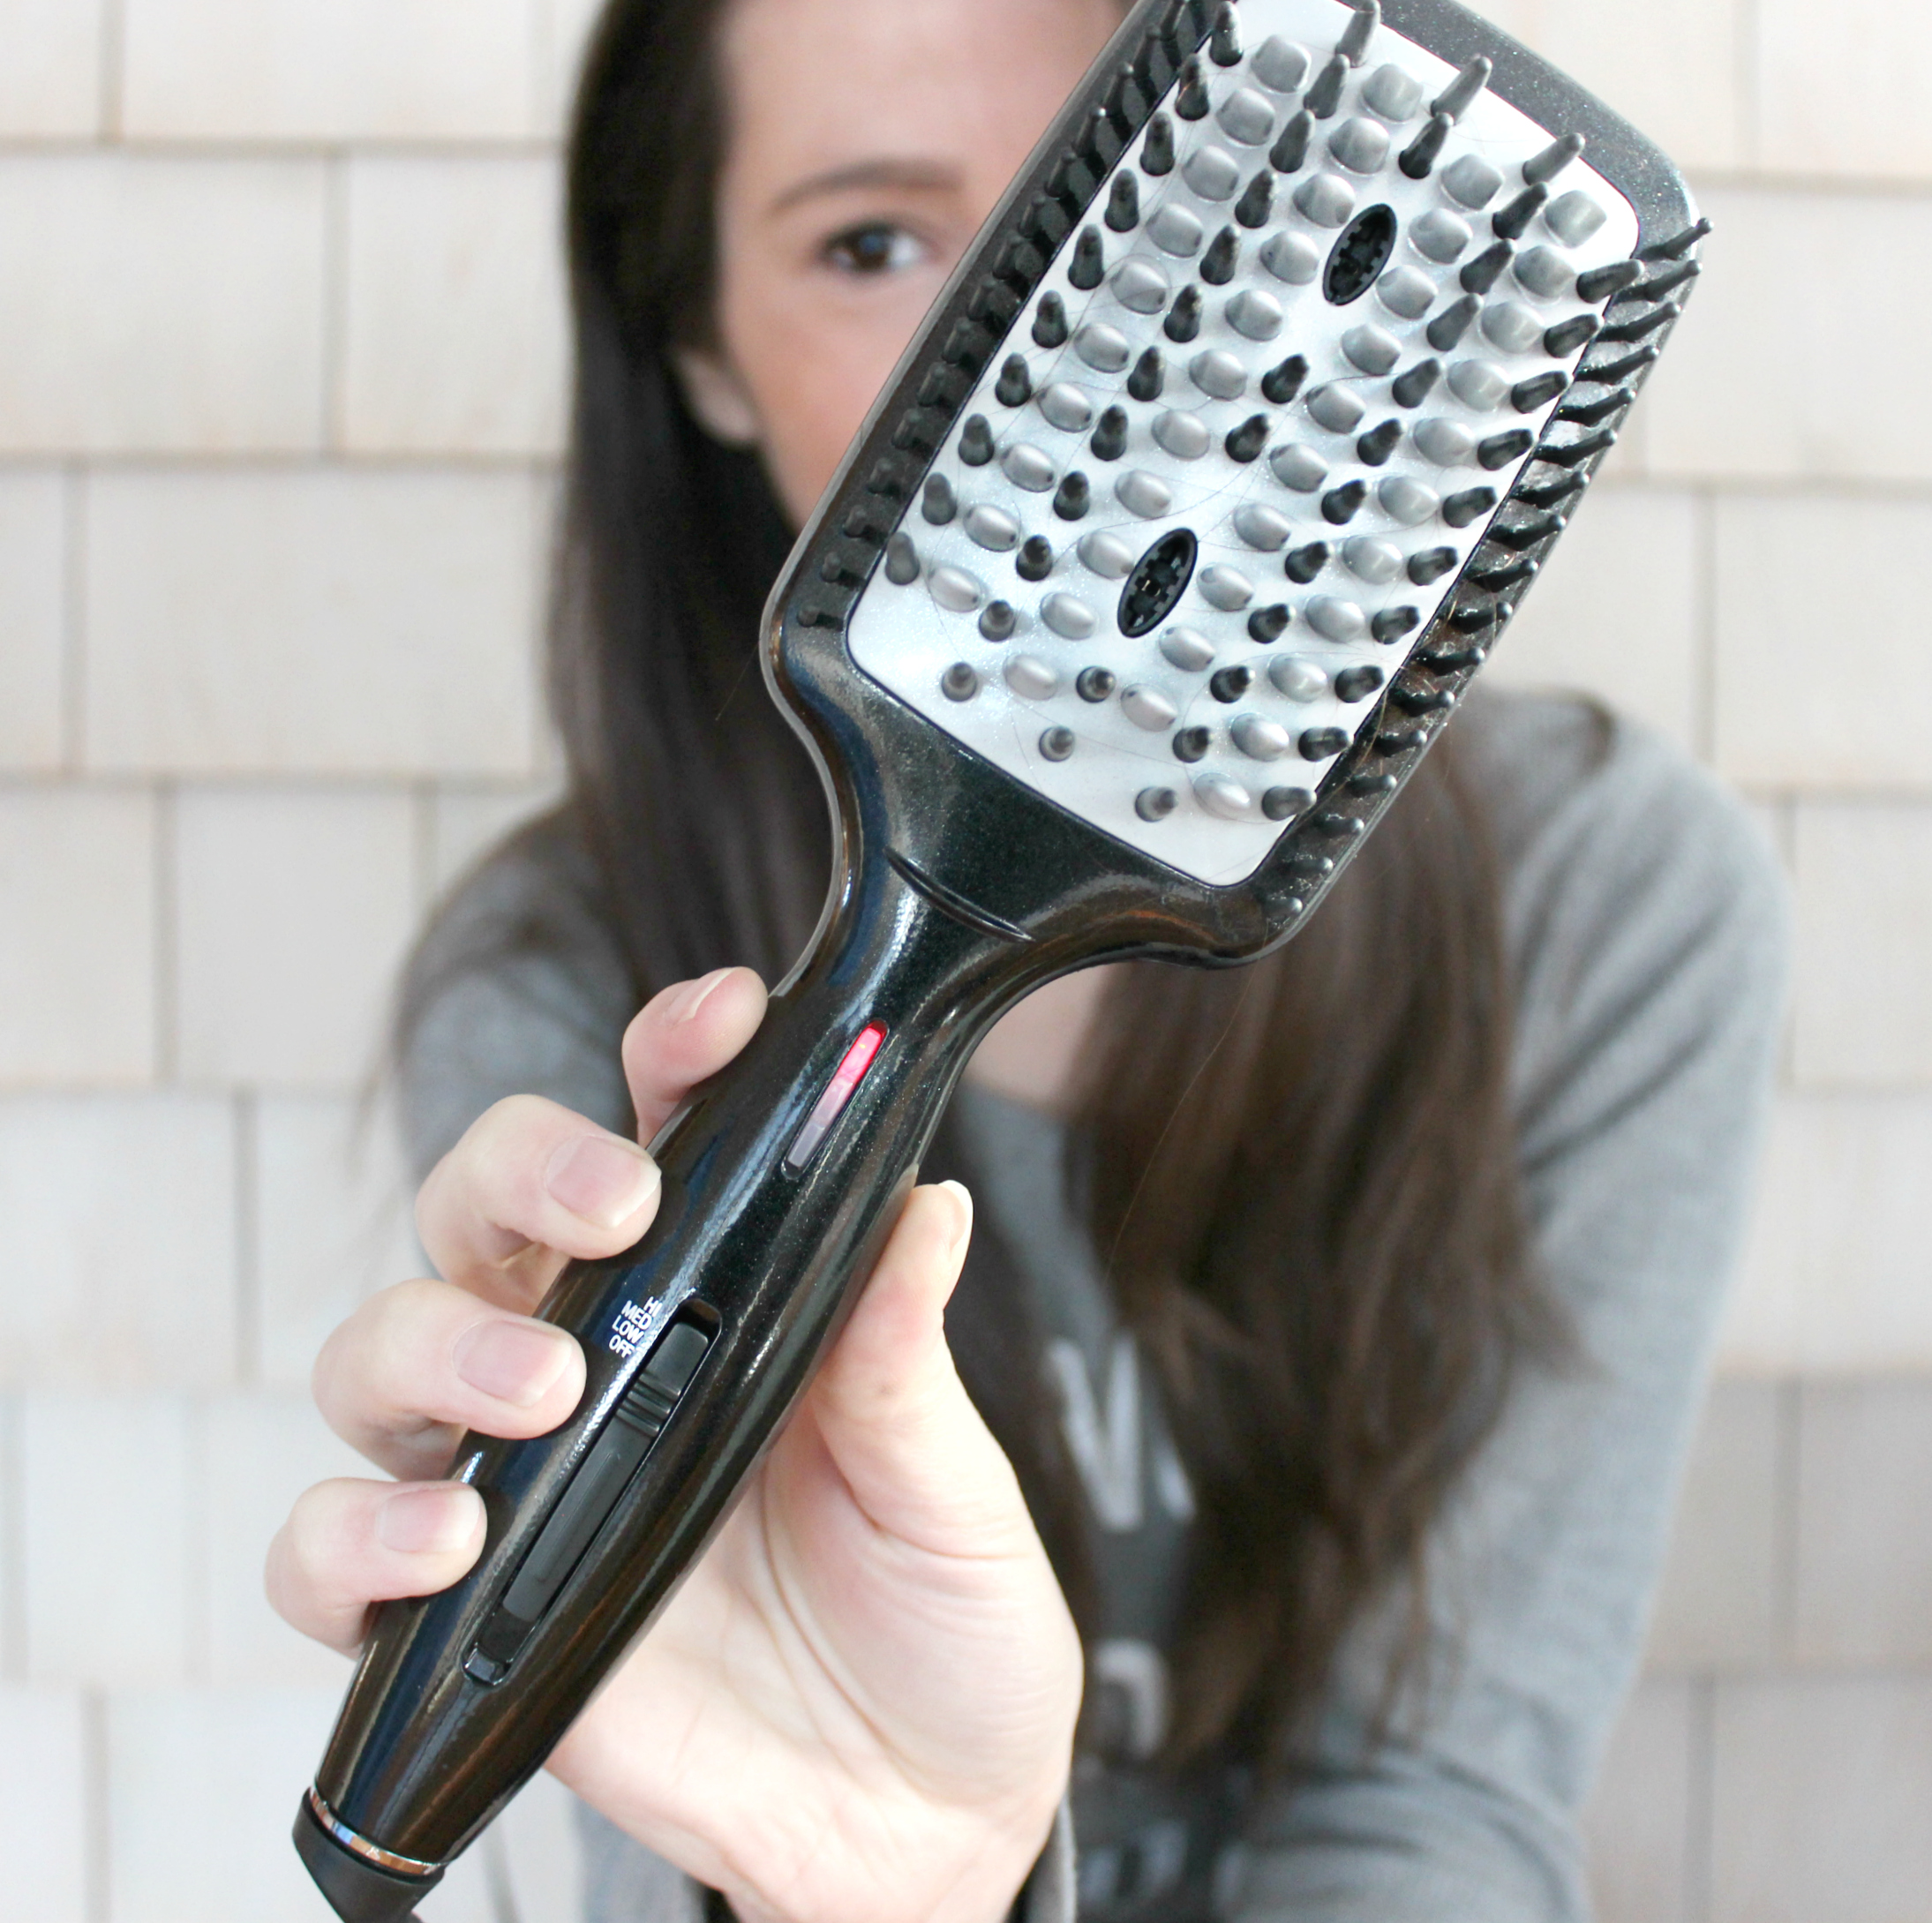 An at home blowout tutorial using the new Conair Infiniti Pro Spin Air Brush Styler